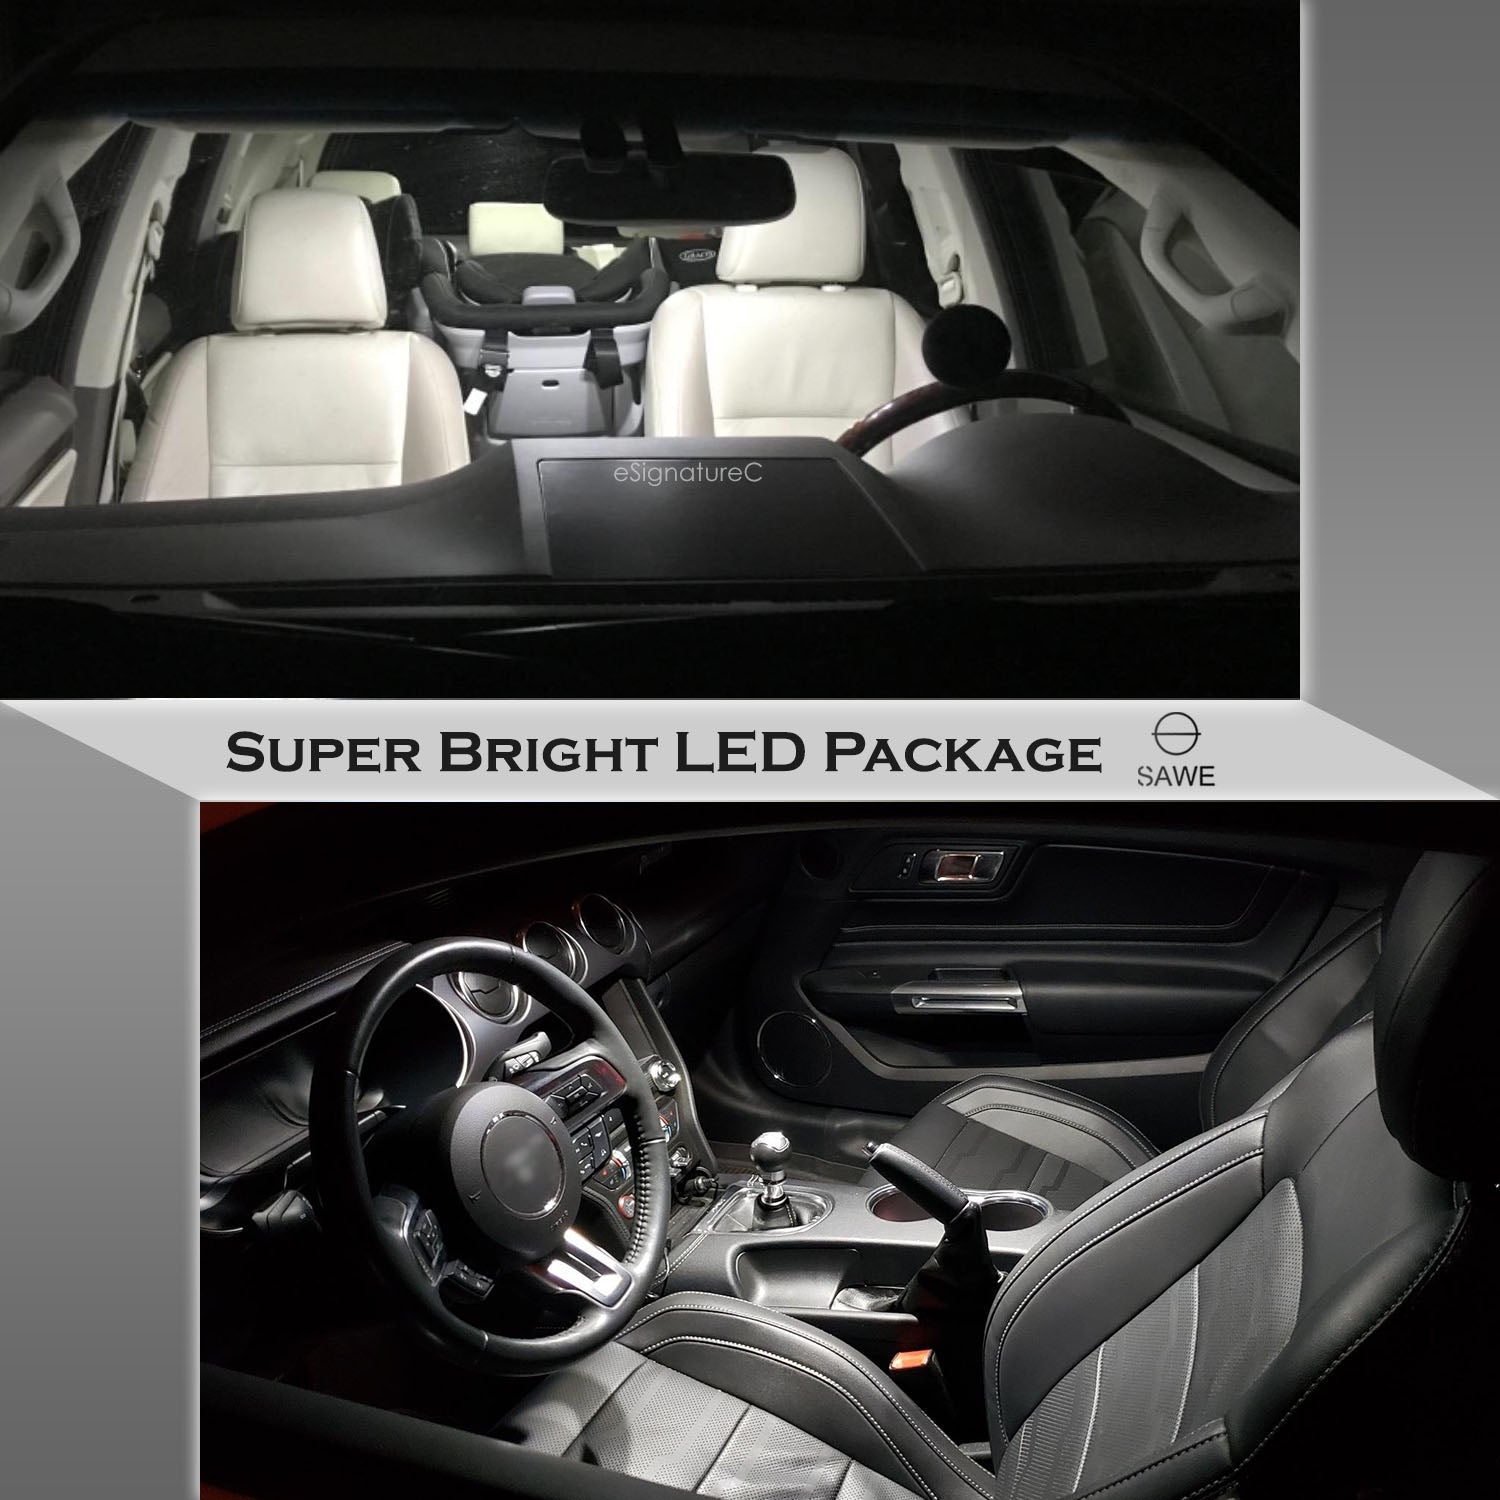 For Nissan Cube Interior LED Lights - Dome & Map Light Bulbs Package Kit for 2009 - 2014 - White